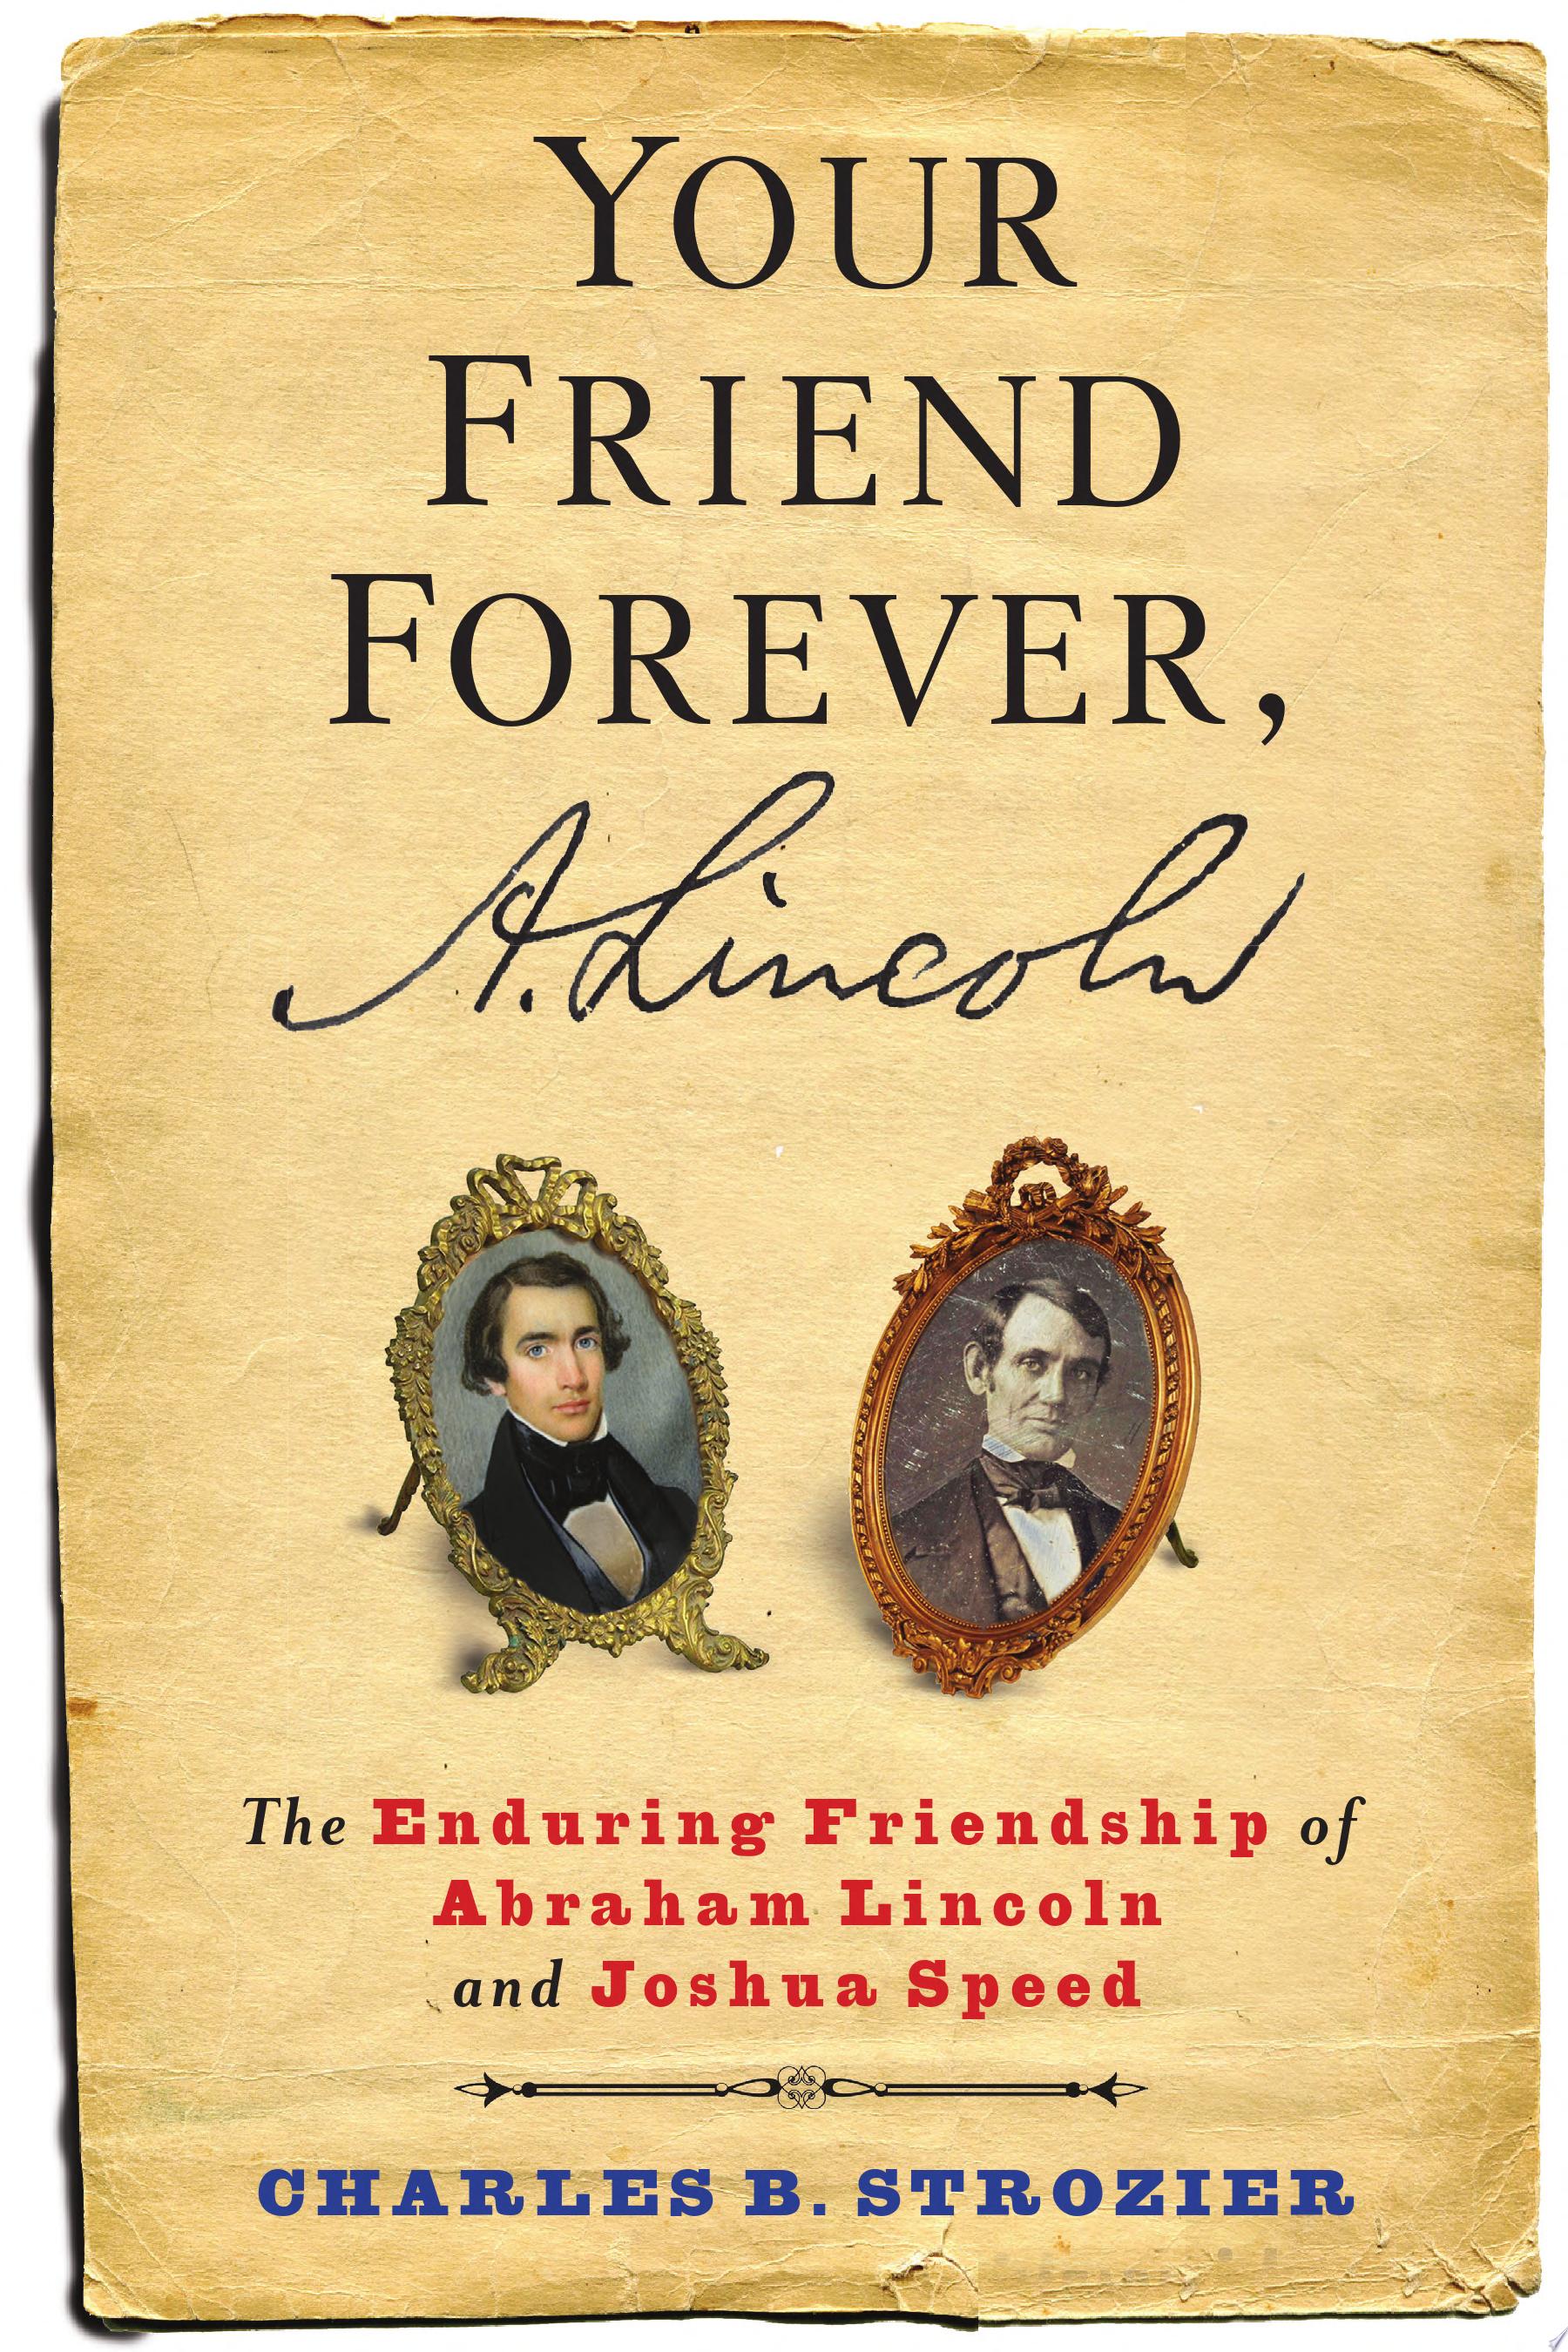 Image for "Your Friend Forever, A. Lincoln"